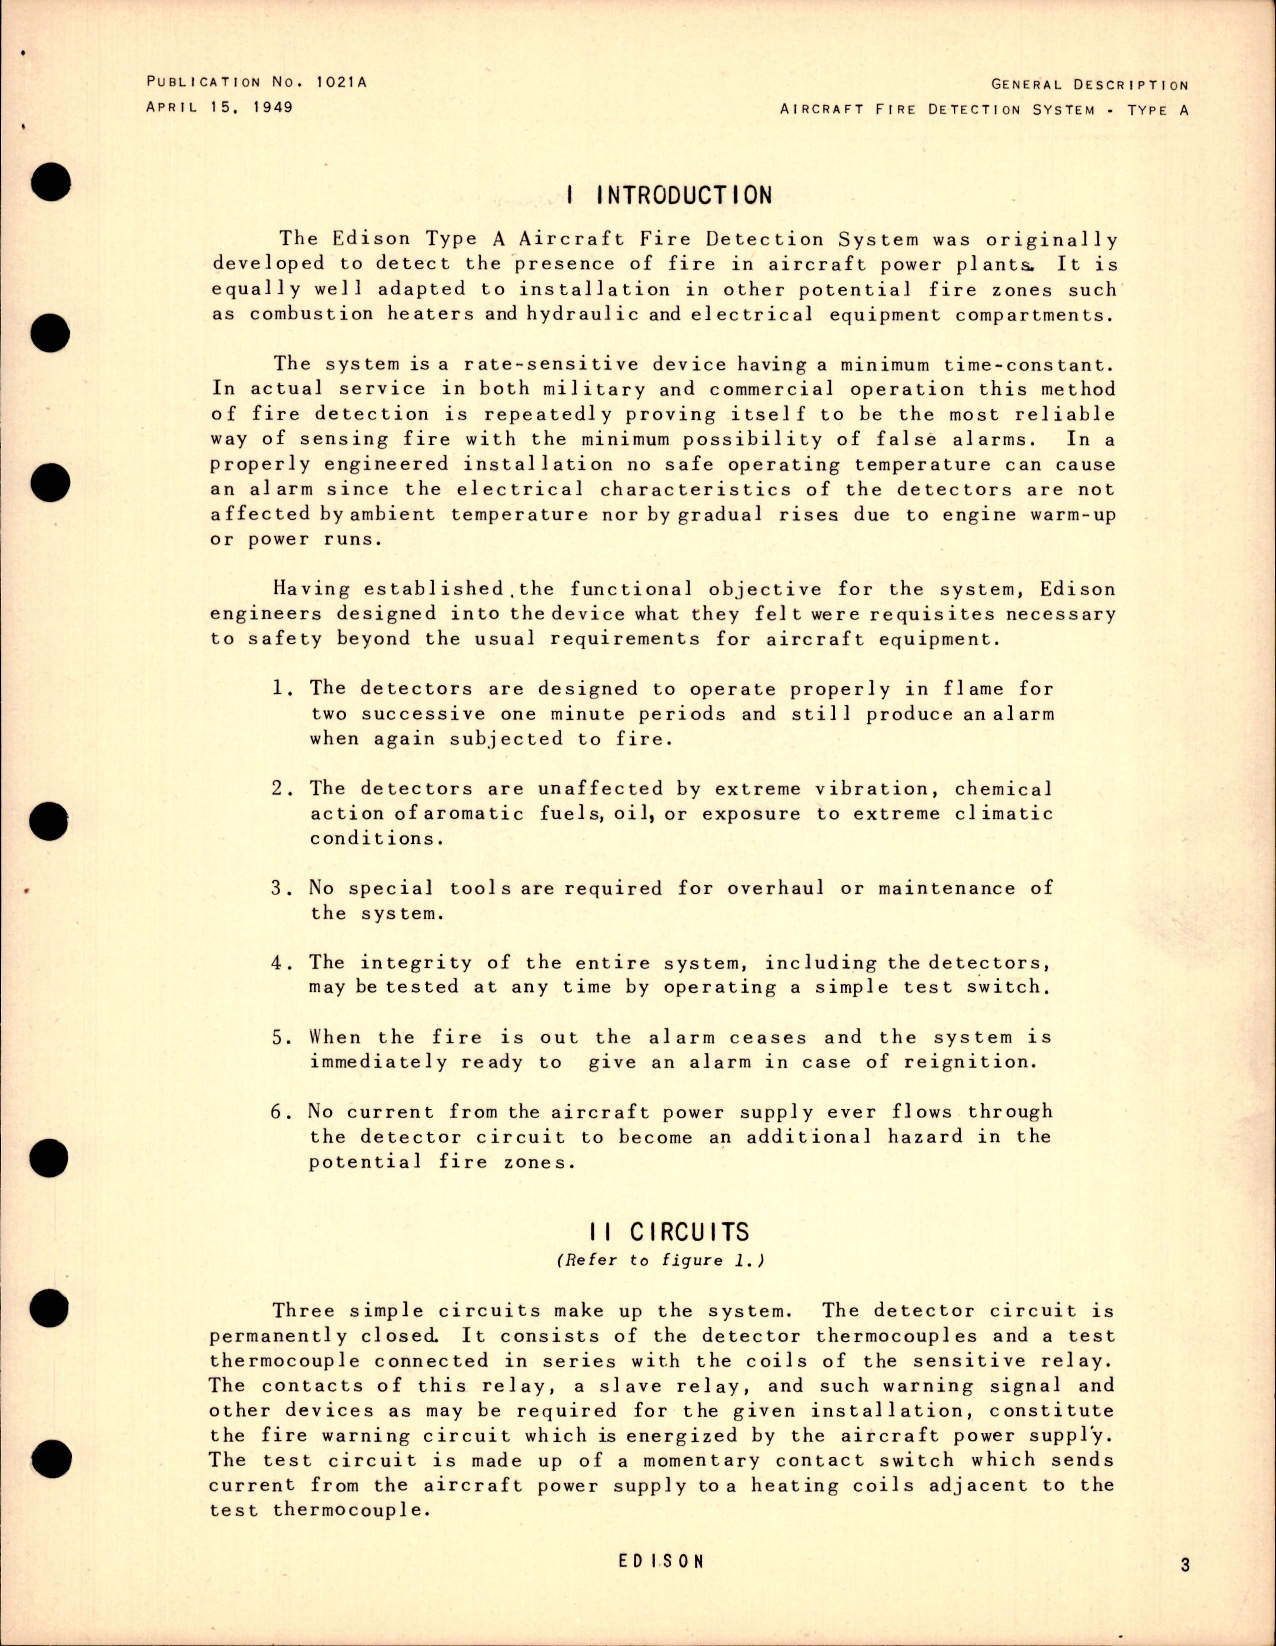 Sample page 5 from AirCorps Library document: Service Manual No. 502 for Aircraft Fire Detection System Type A